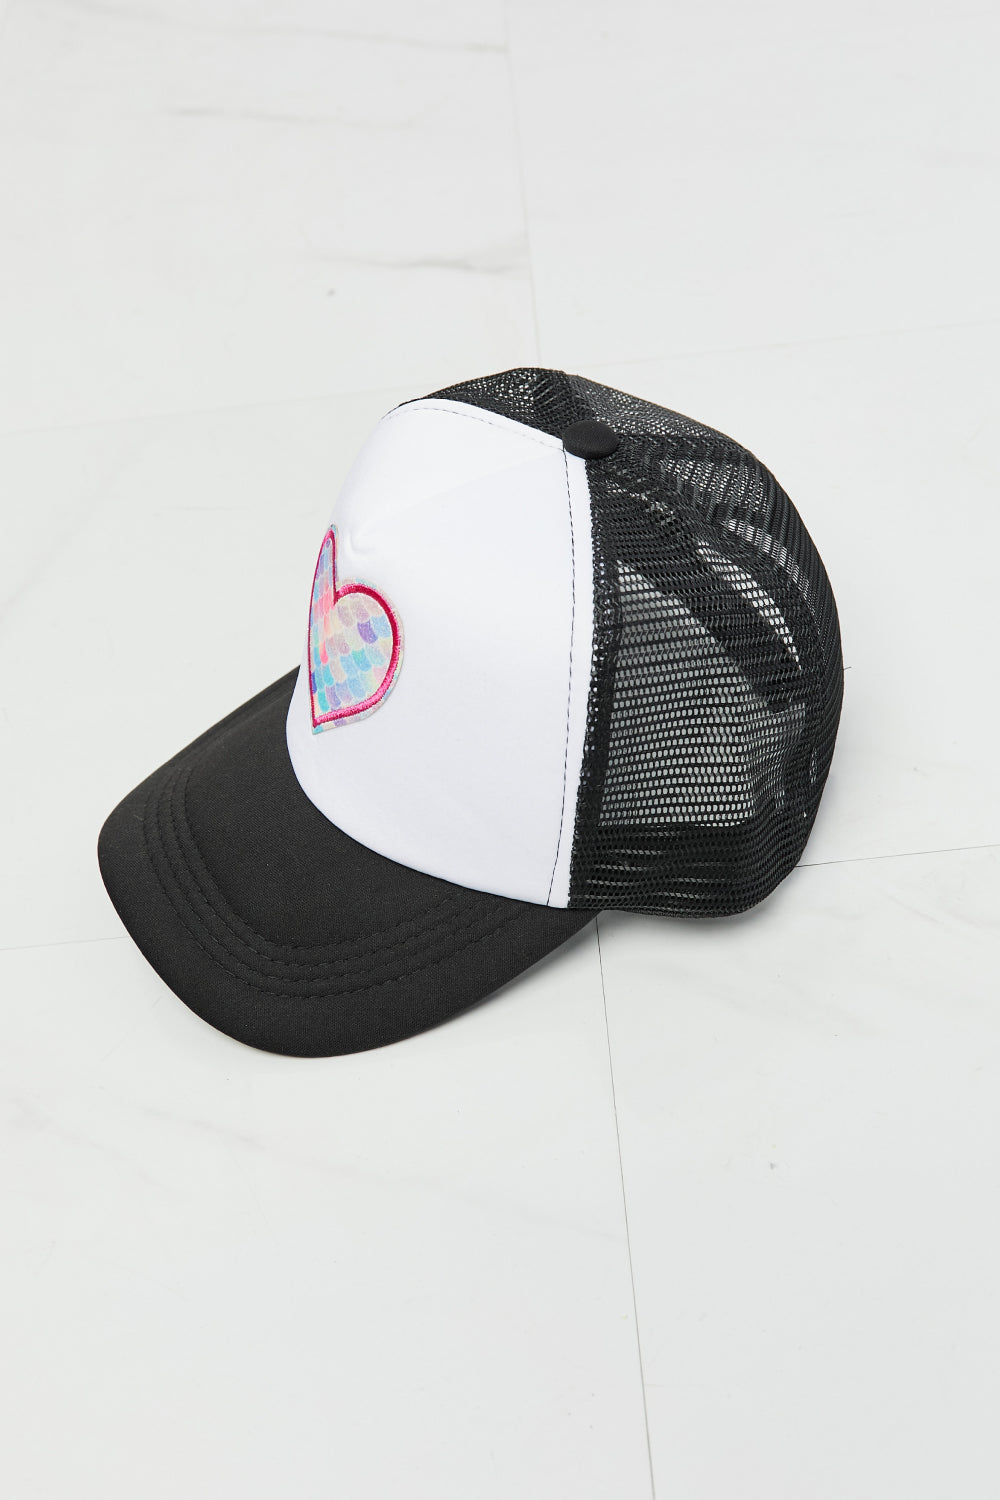 Fame Falling For You Trucker Hat in Black - The Fashion Unicorn